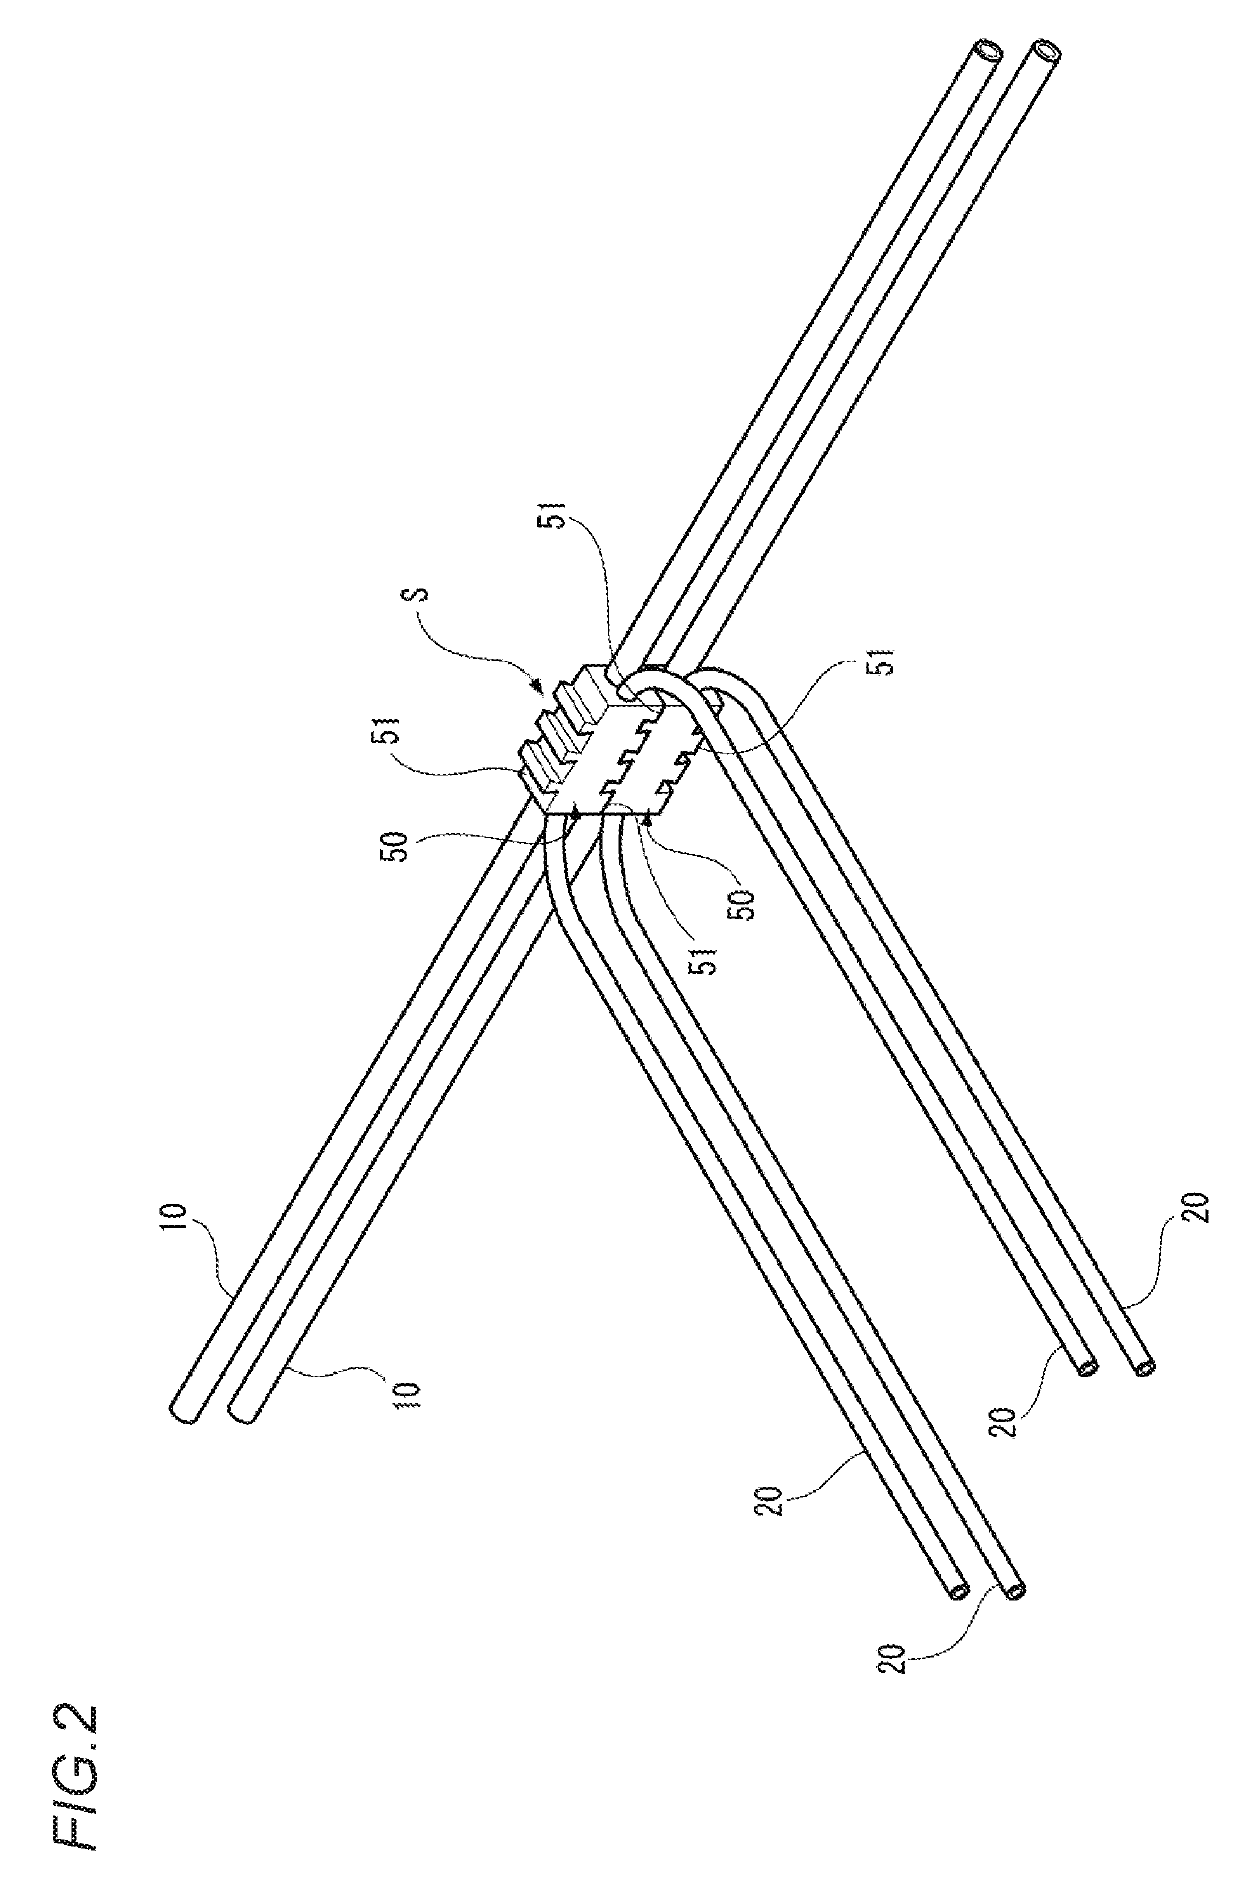 Branching Circuit Body and Branching Method of Electric Wires